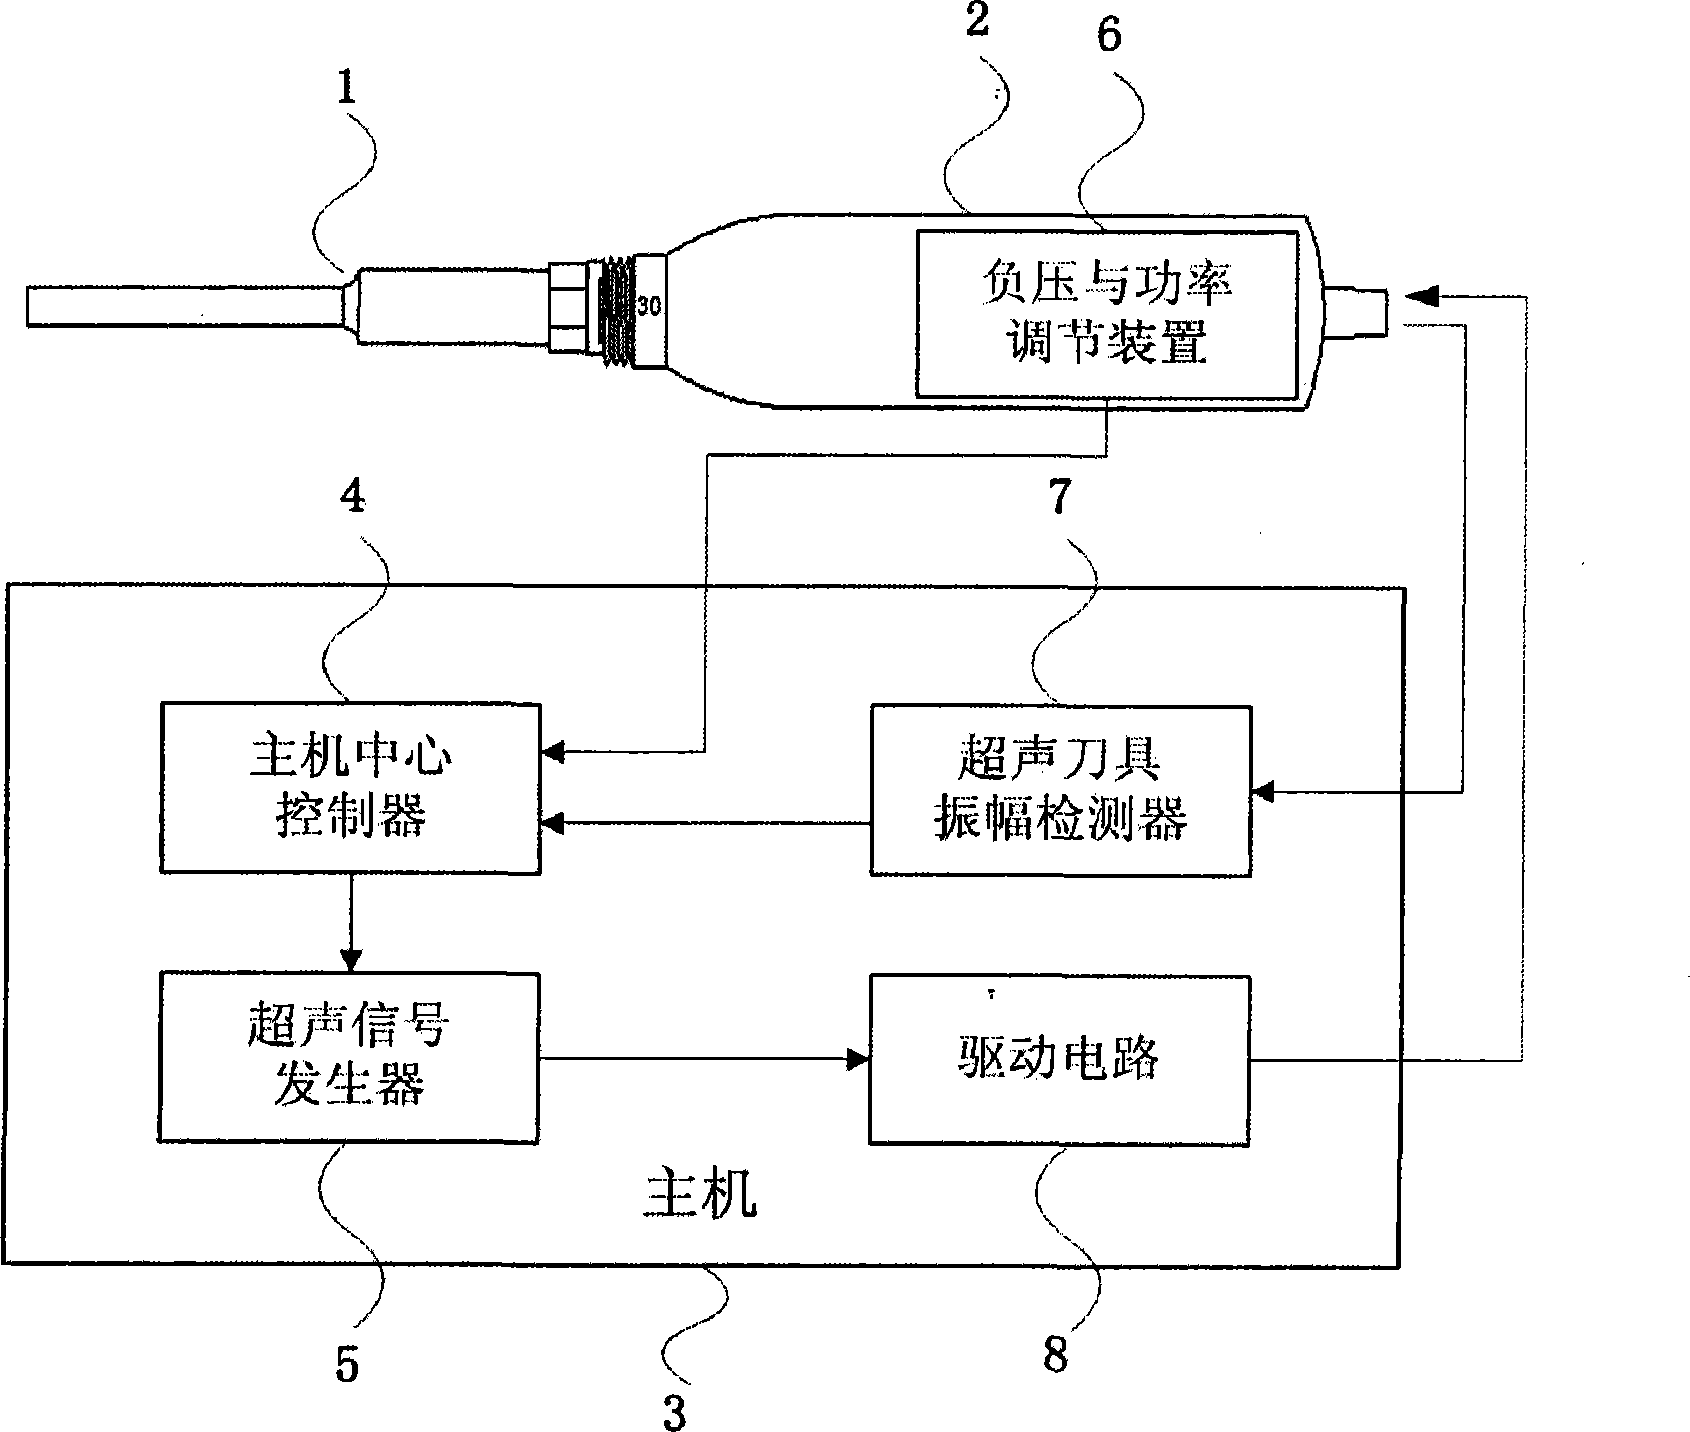 Ultrasonic aspiration operation system capable of being controlled accurately